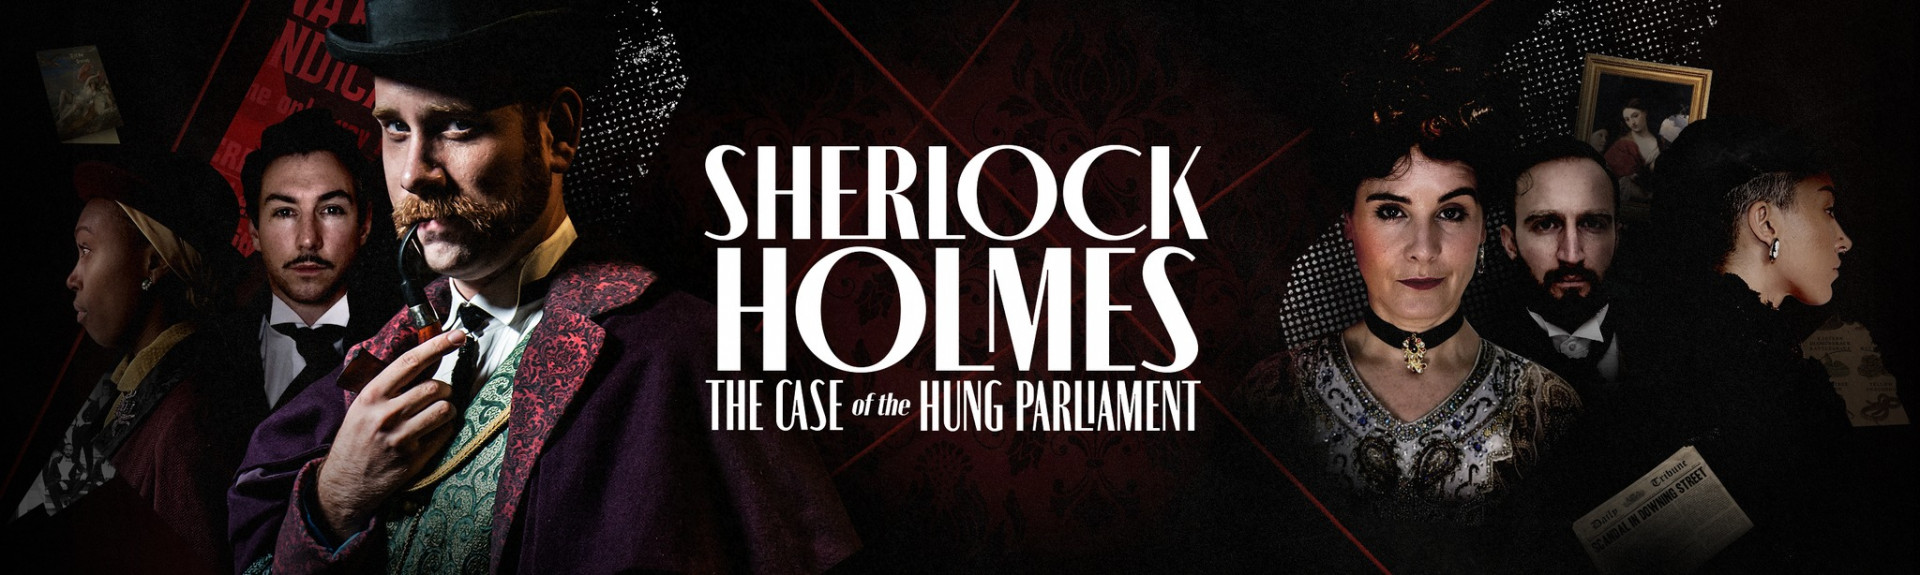 Sherlock Holmes: The Case of the Hung Parliament